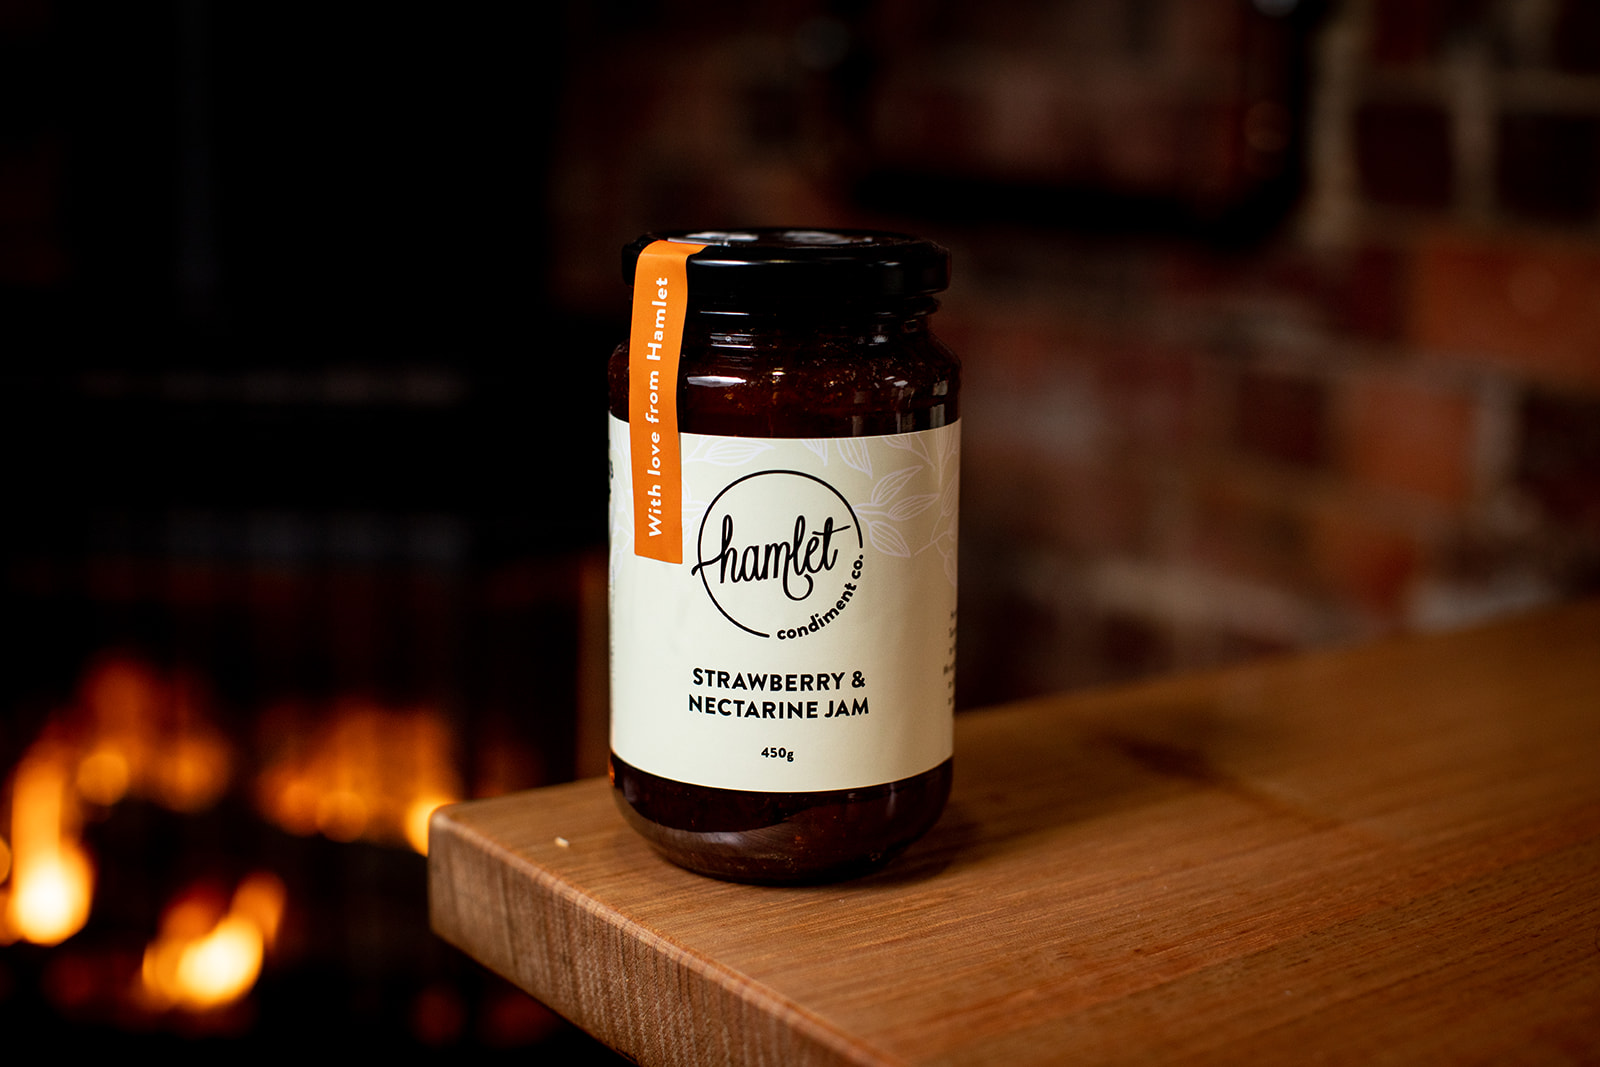 A jar of Hamlet's Strawberry and Nectarine Jam sitting on a timber table.